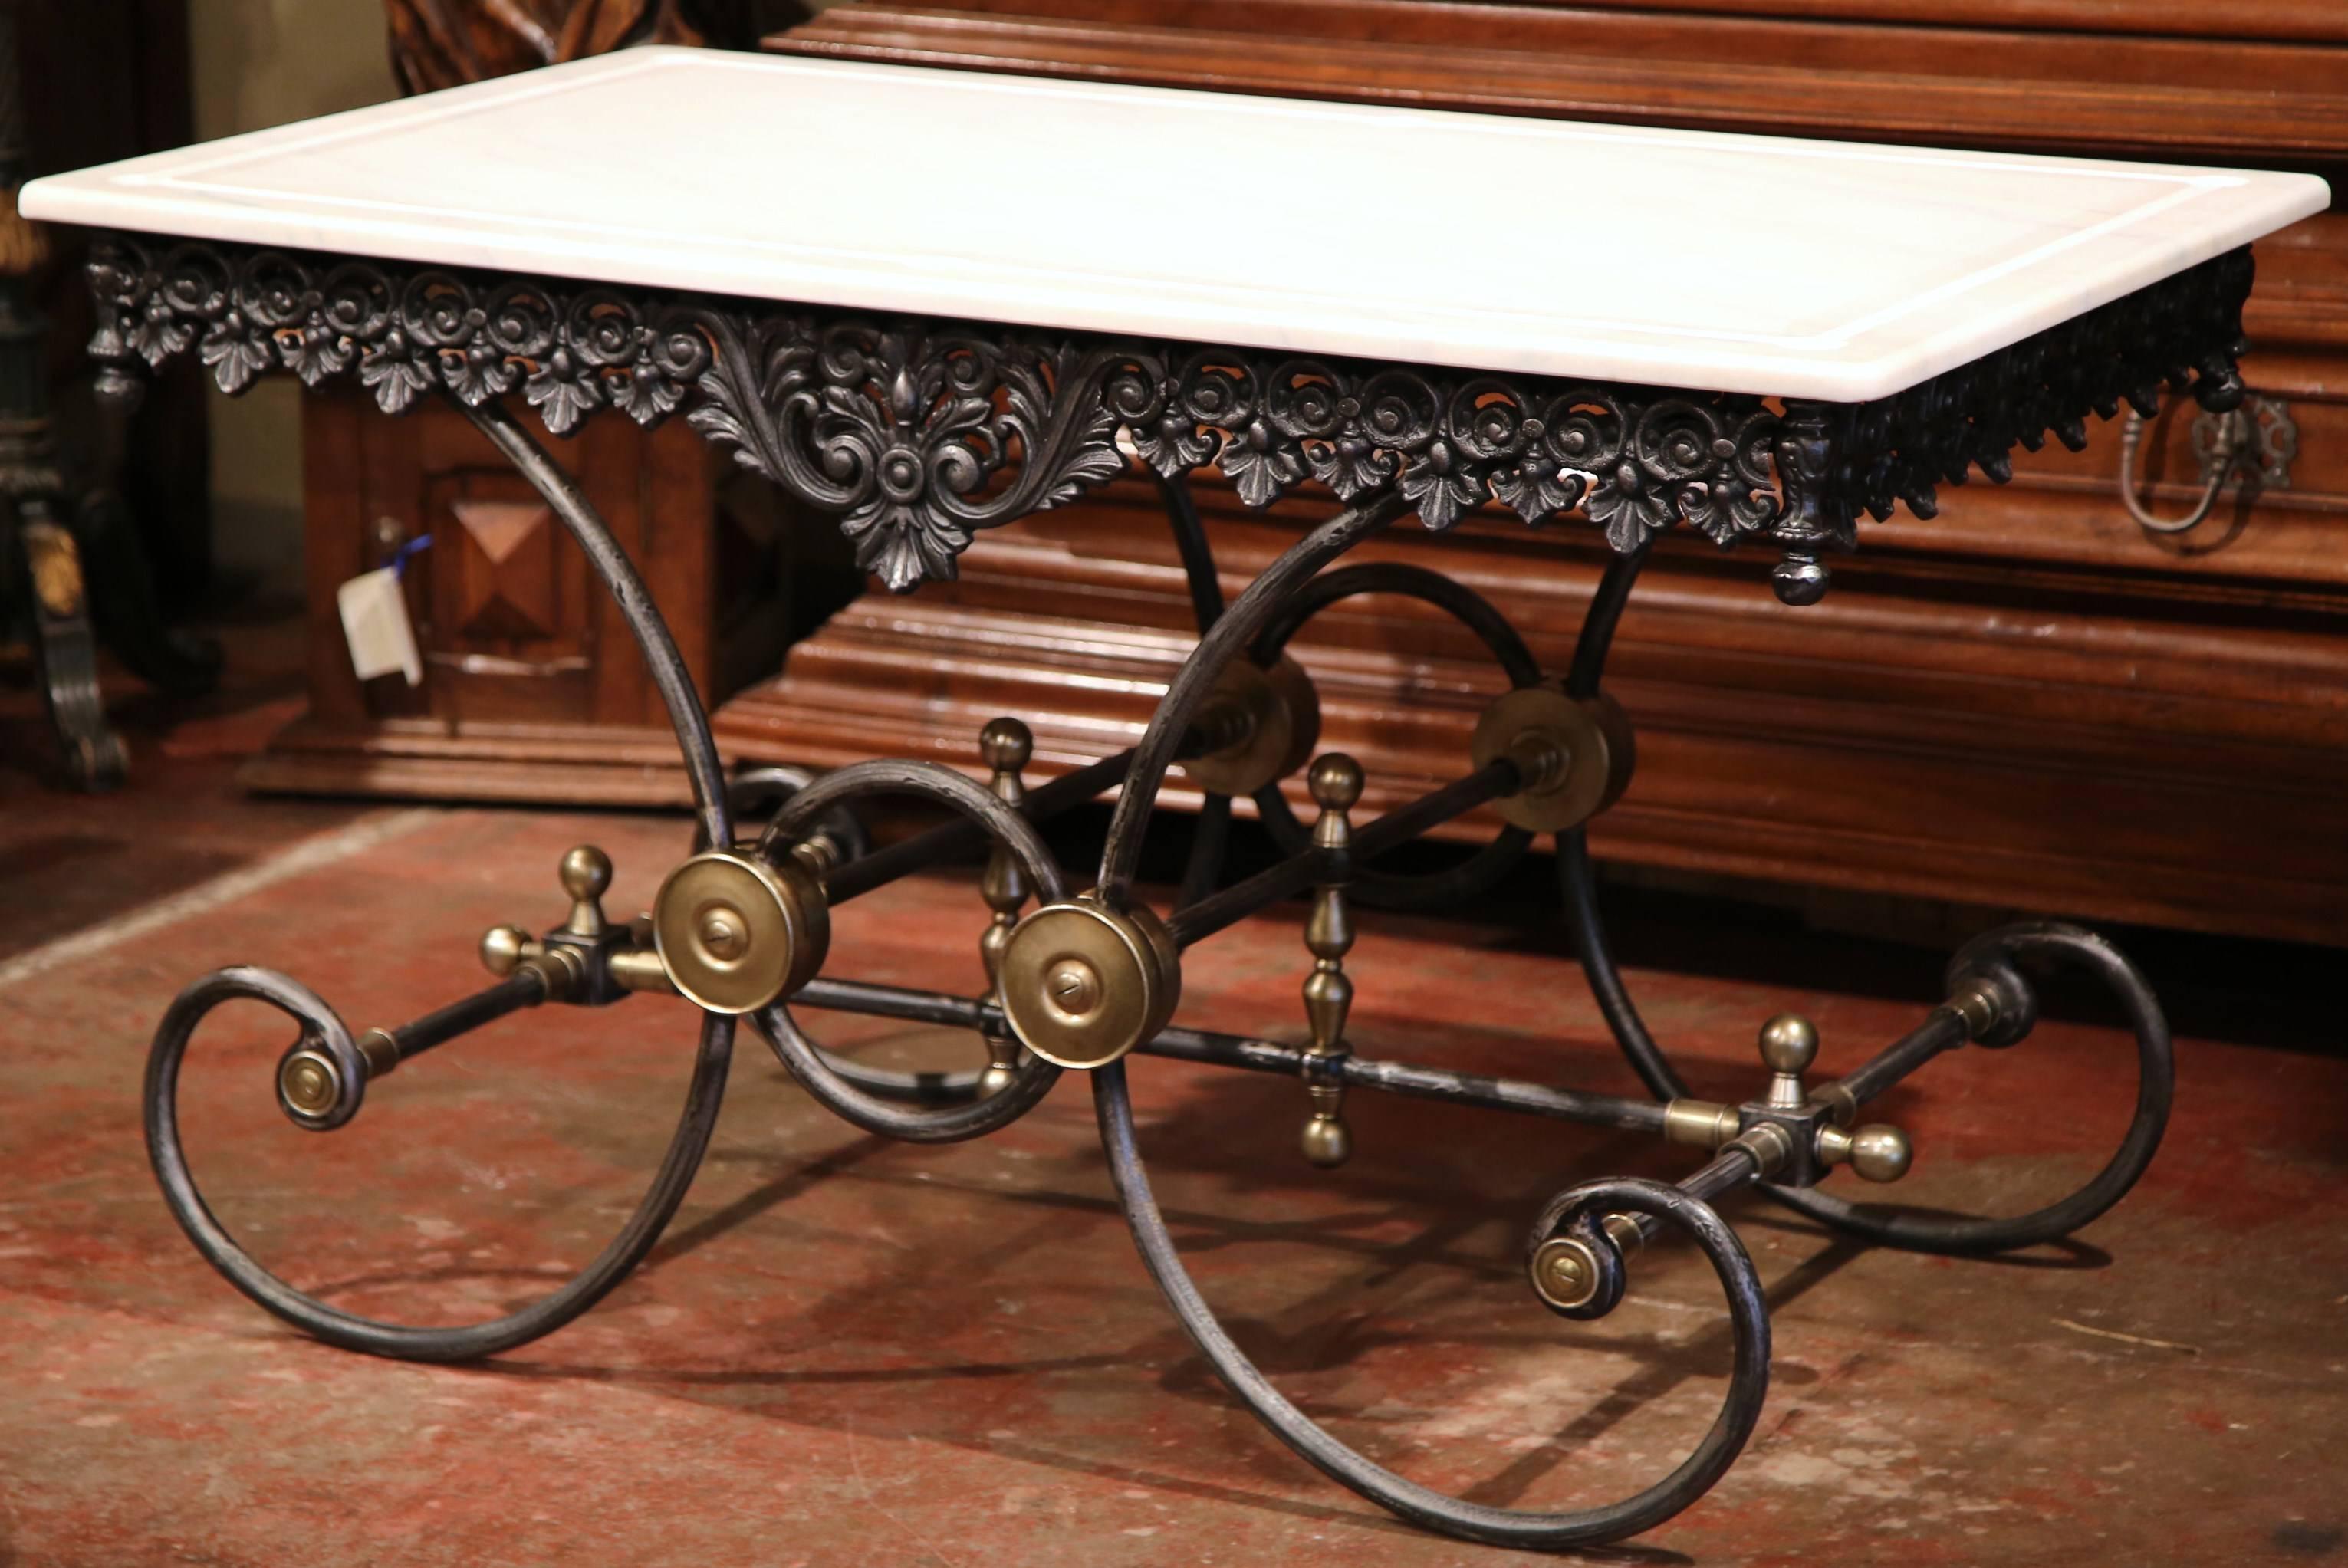 This large butcher table, or pastry table, would add the ideal amount of surface space to any kitchen. Crafted in France, this table has a polished iron finish and intricate metal work throughout the structure. The table has a scalloped apron,